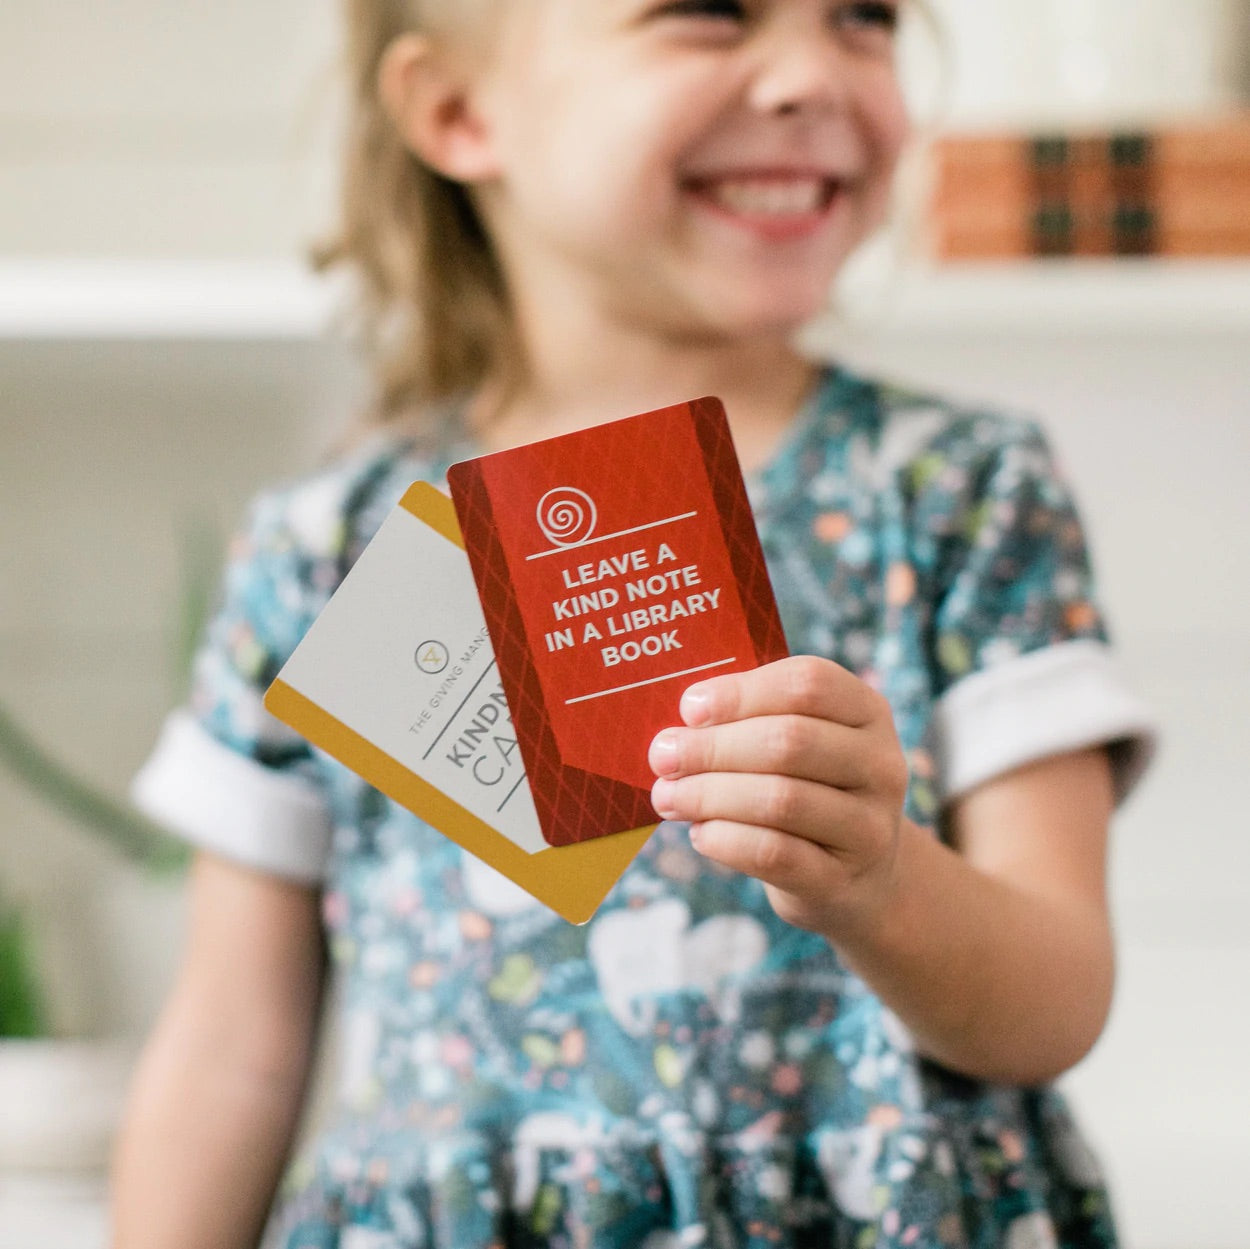 Kindness Cards - Inspire Kindness in Your Family